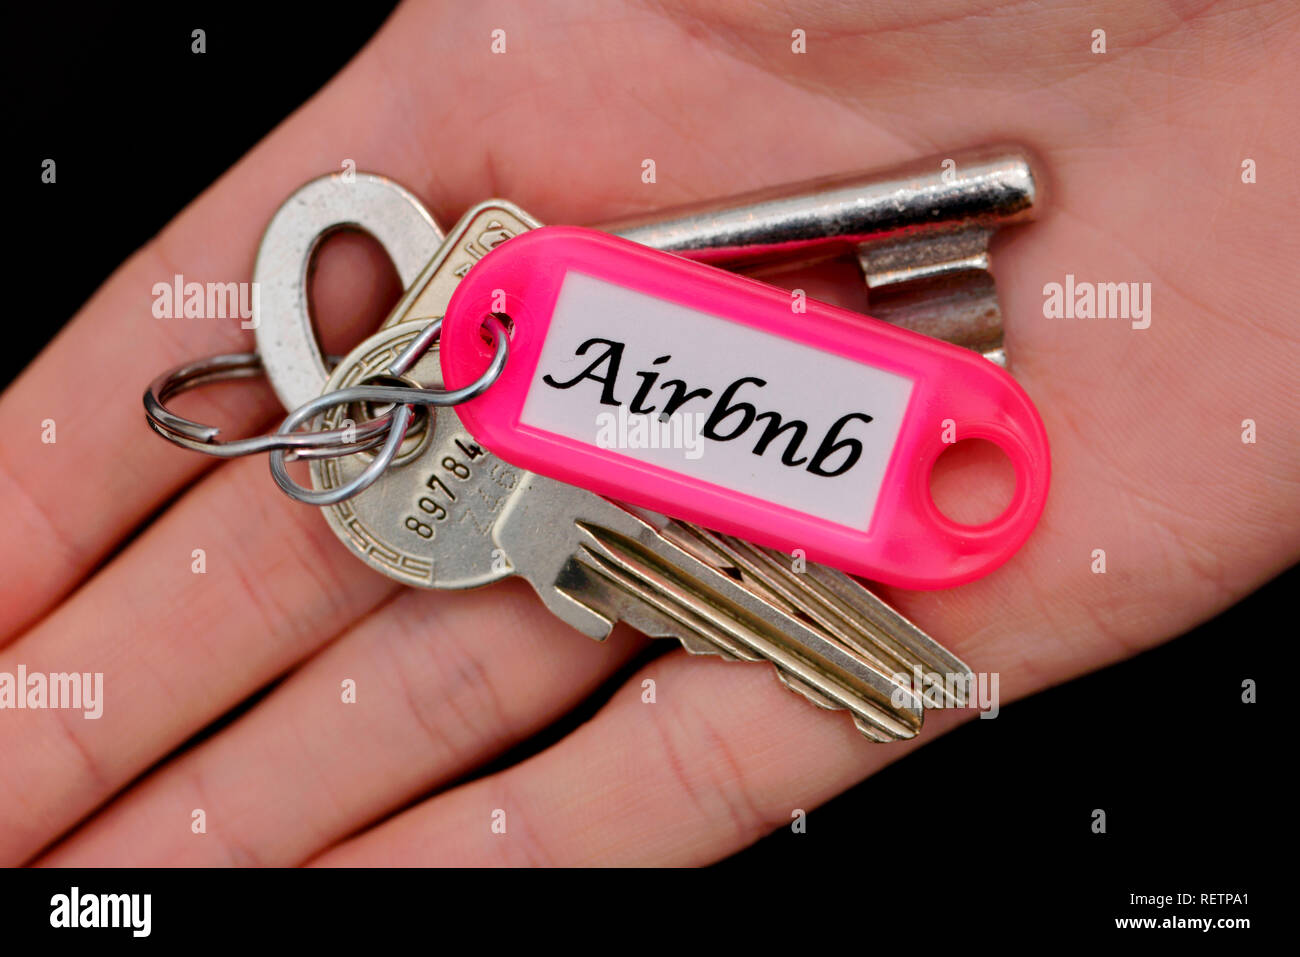 keys for holiday apartment, Airbnb Stock Photo